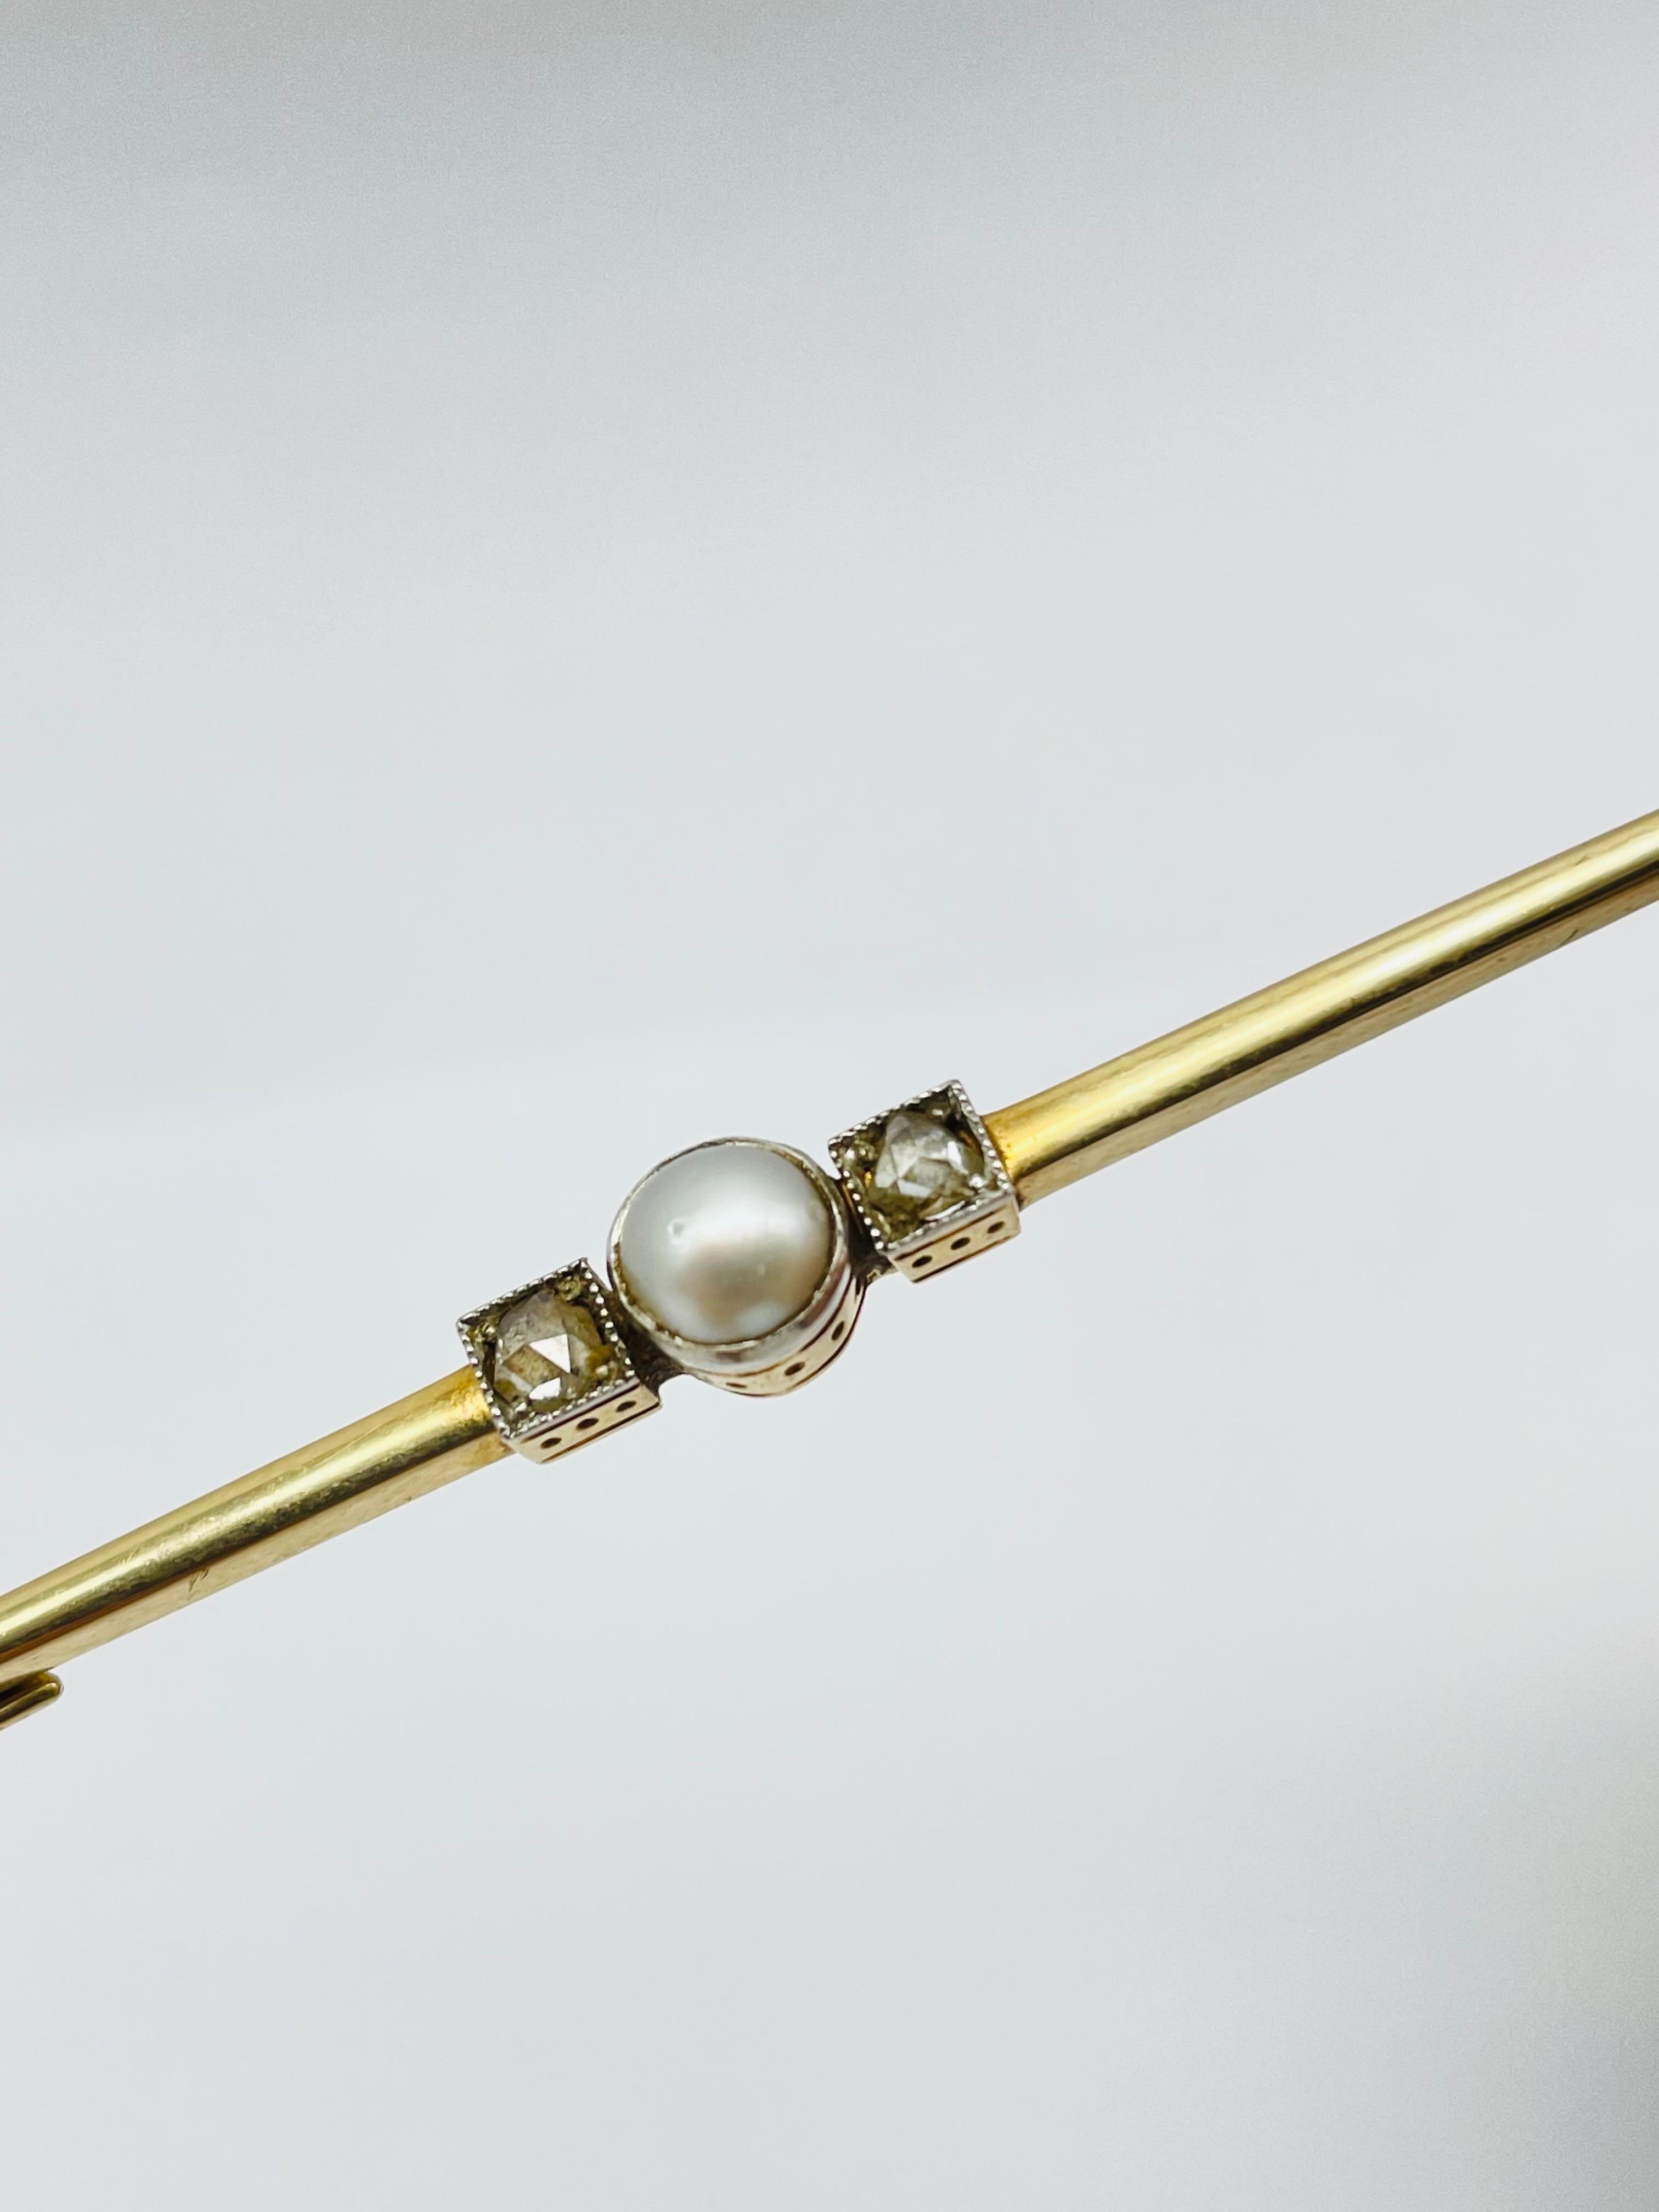 Antique 14k Gold Bar Brooch with Rose Cut Diamond and Pearl For Sale 2